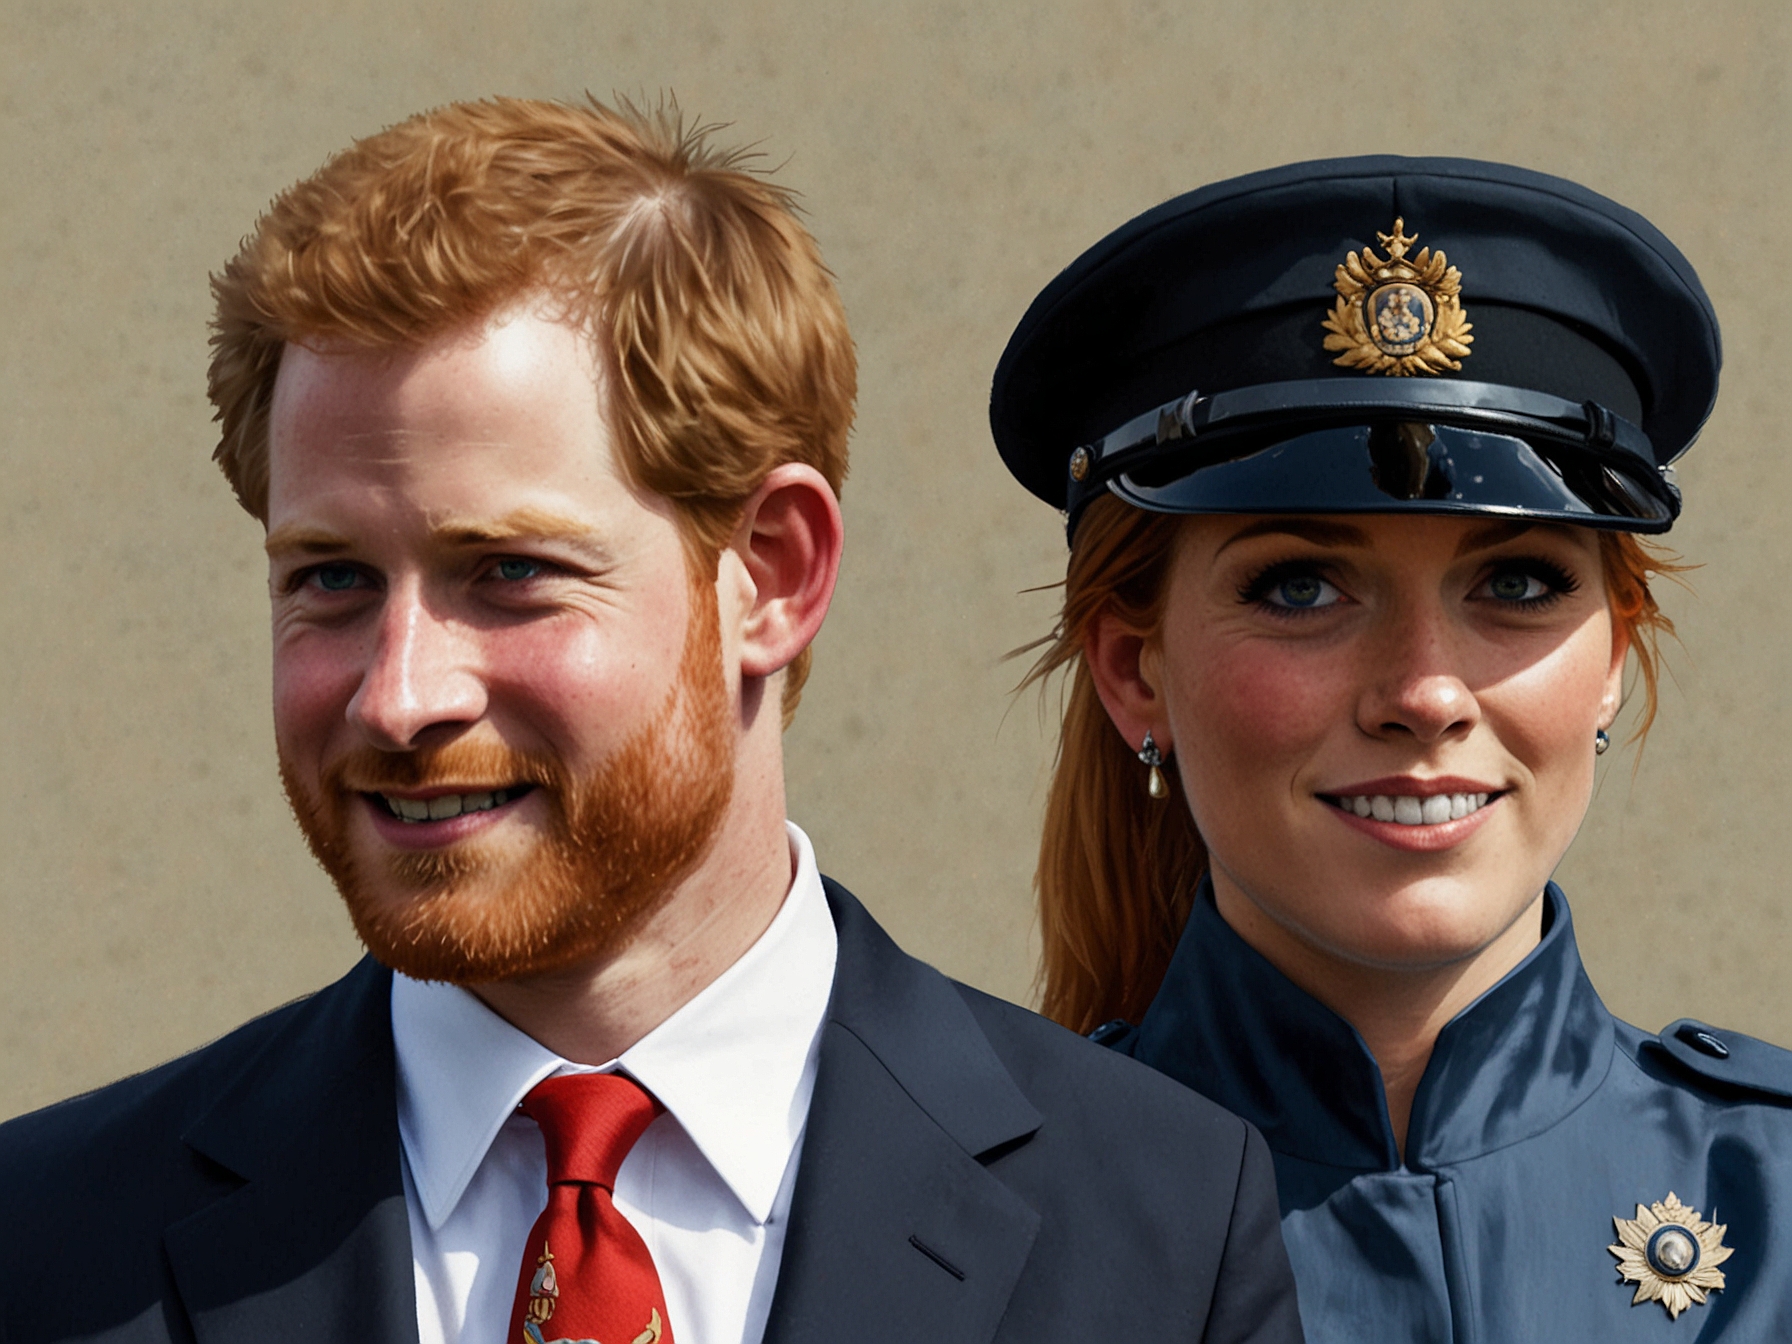 Prince Harry, Prince Andrew, and Sarah Ferguson in previous engagements, illustrating their past presence and involvement compared to their absence during the recent Trooping the Colour.